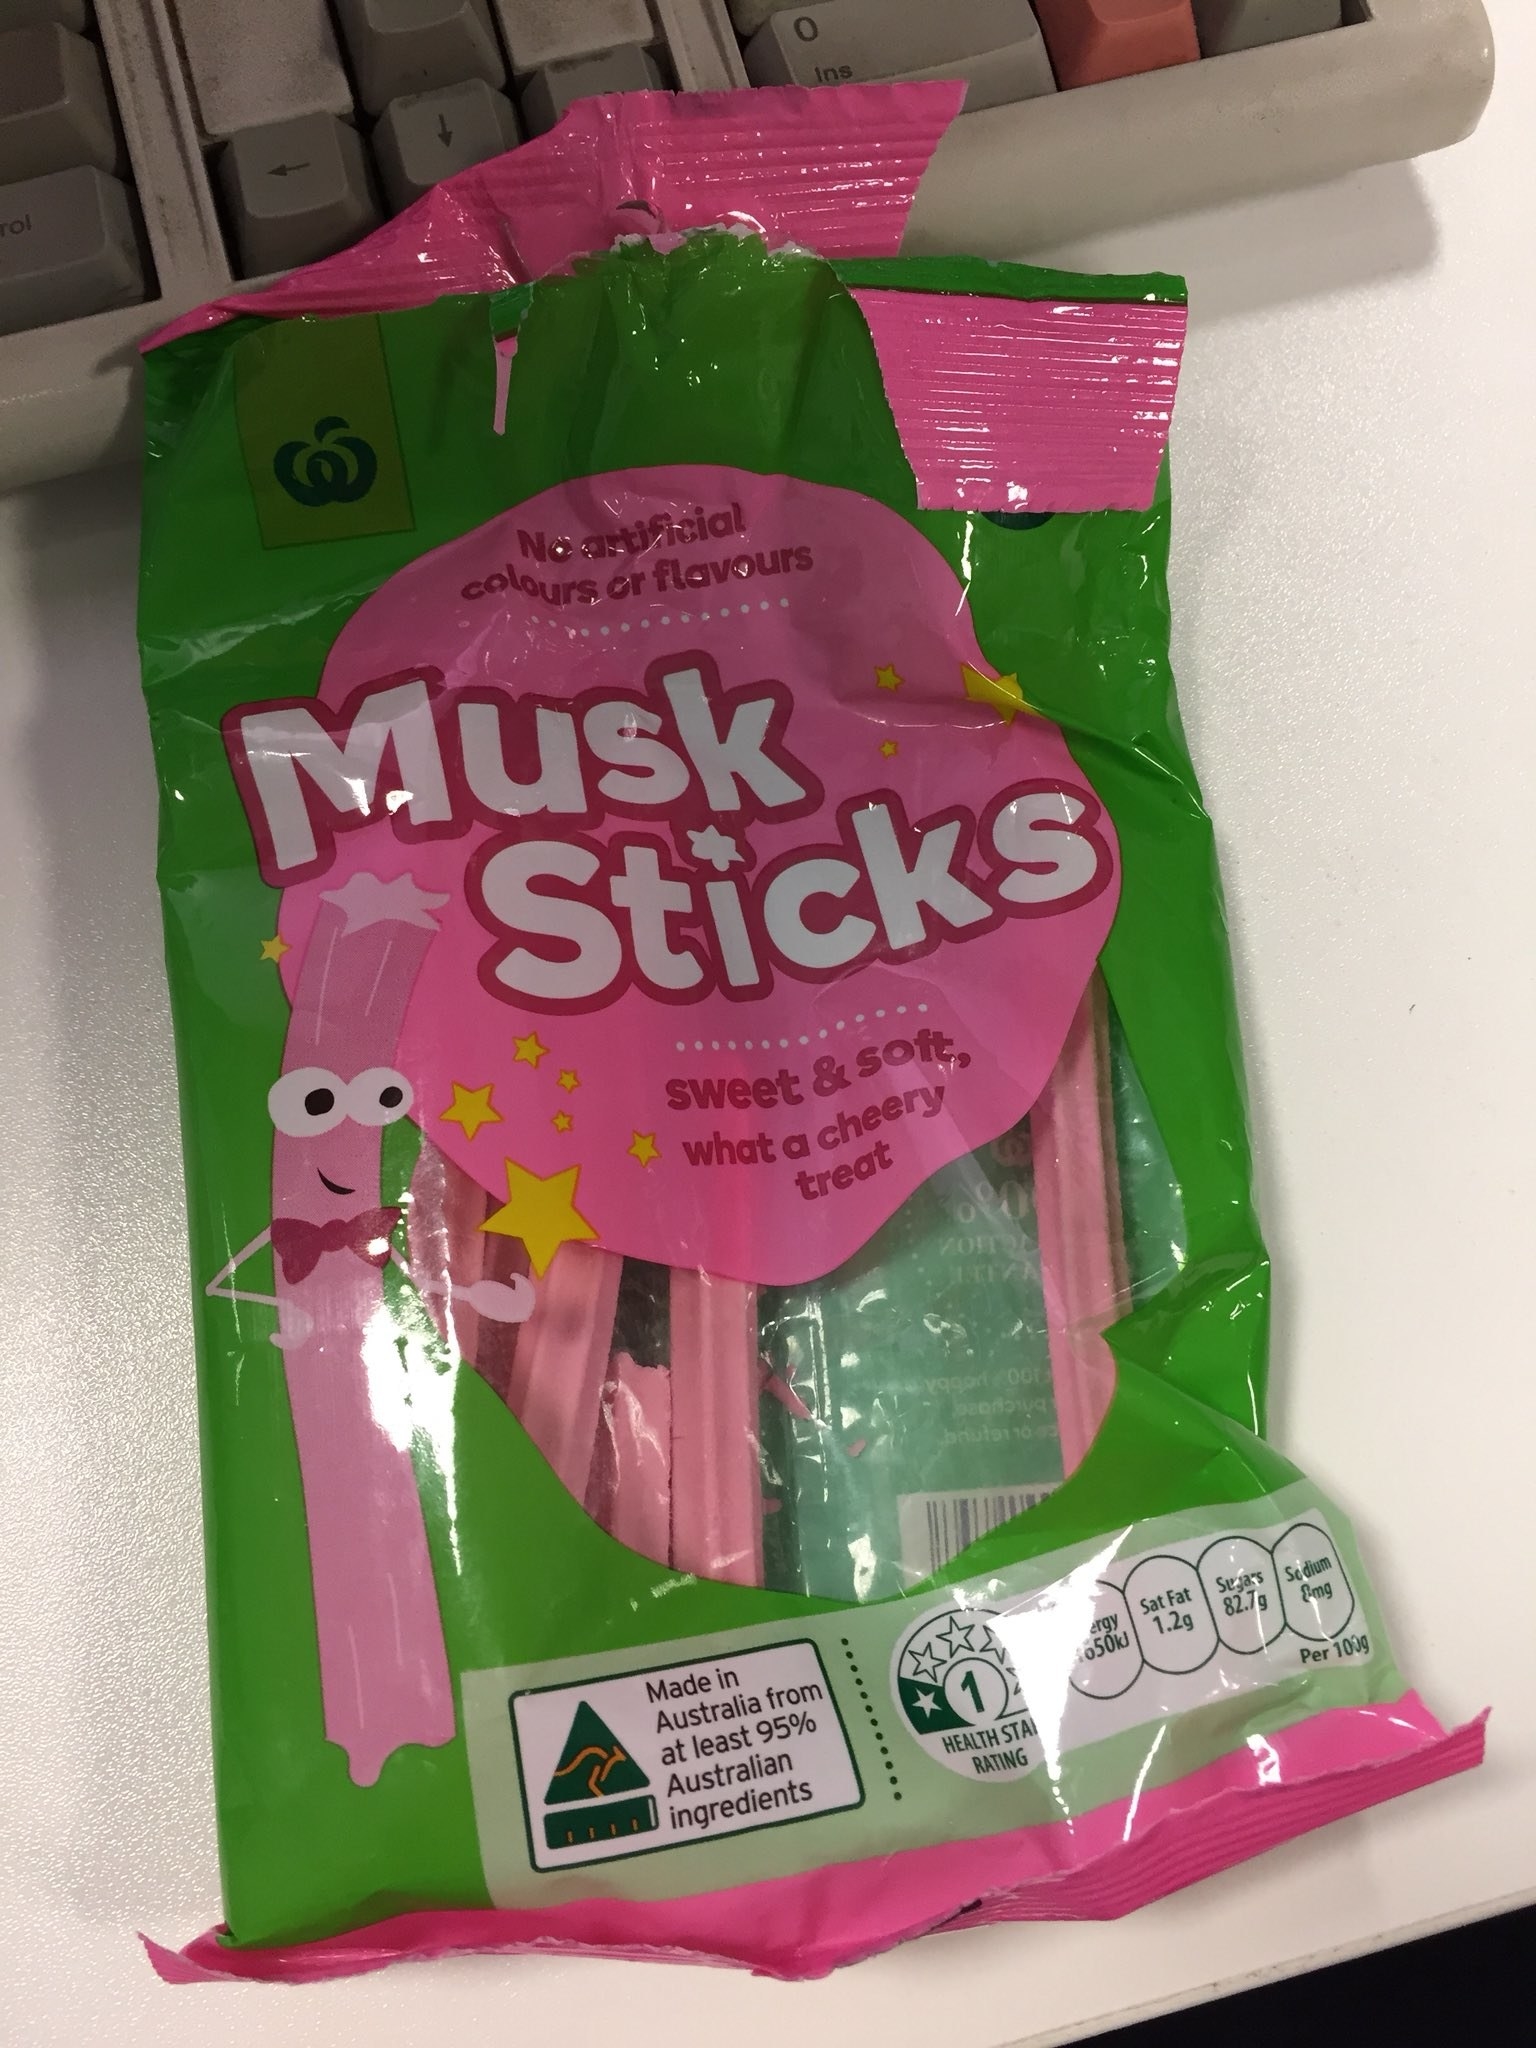 A half empty packet of Woolworths brand Musk Sticks on a table